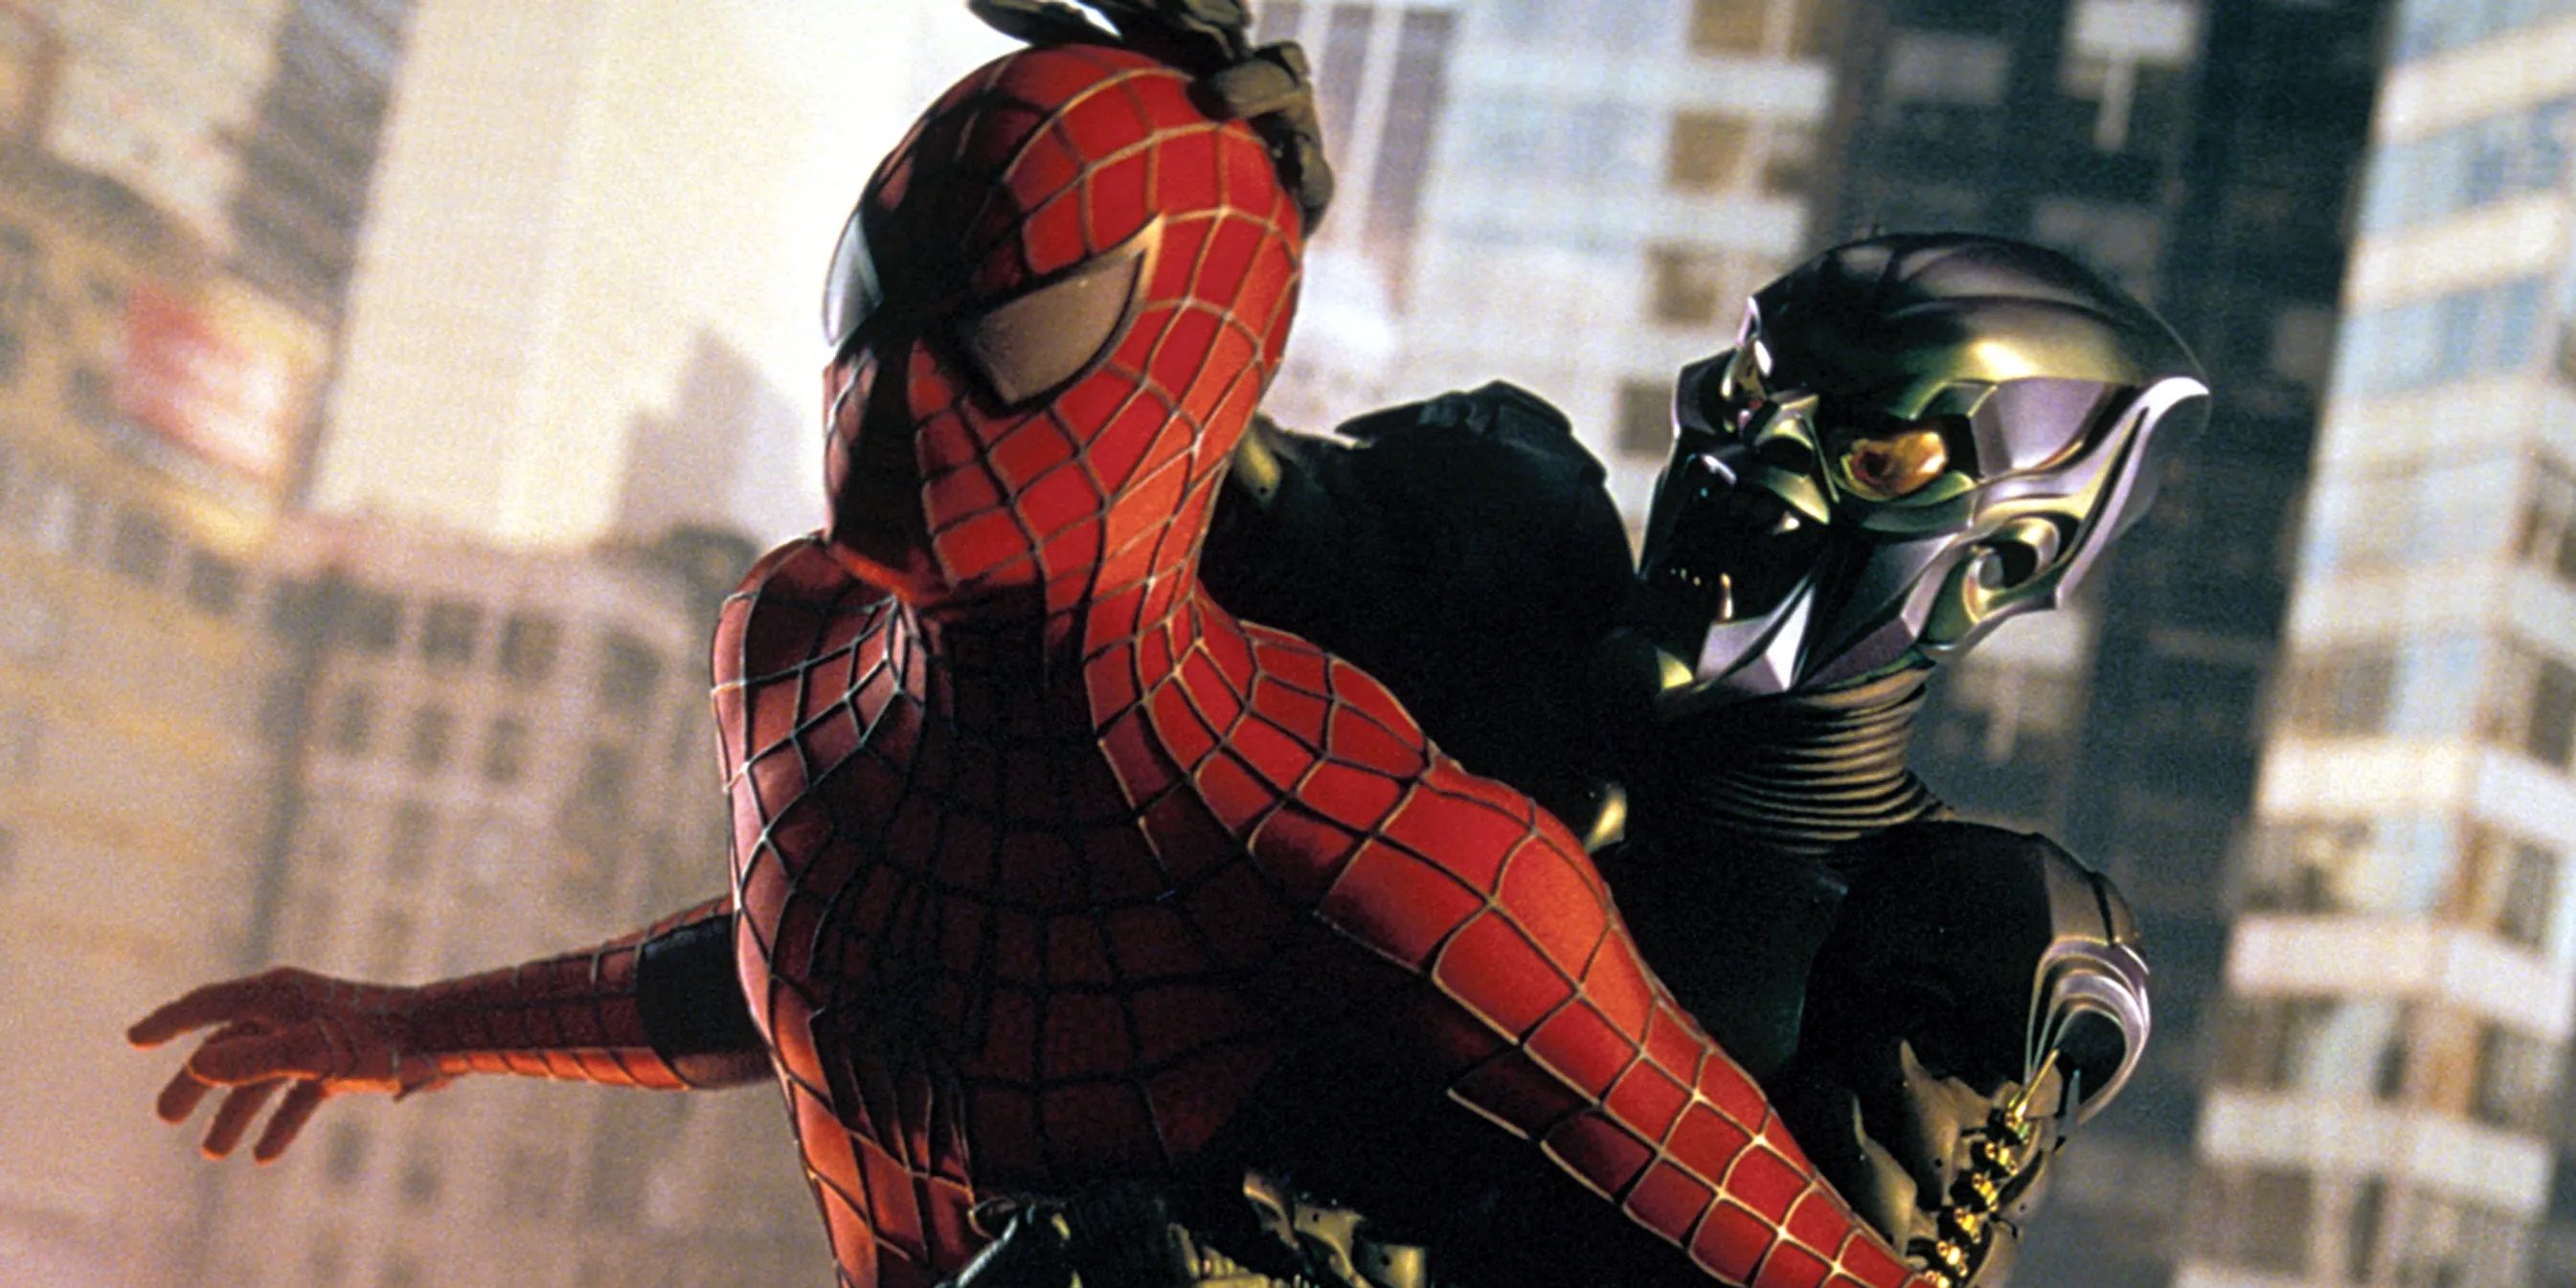 Spider Man and the Green Goblin